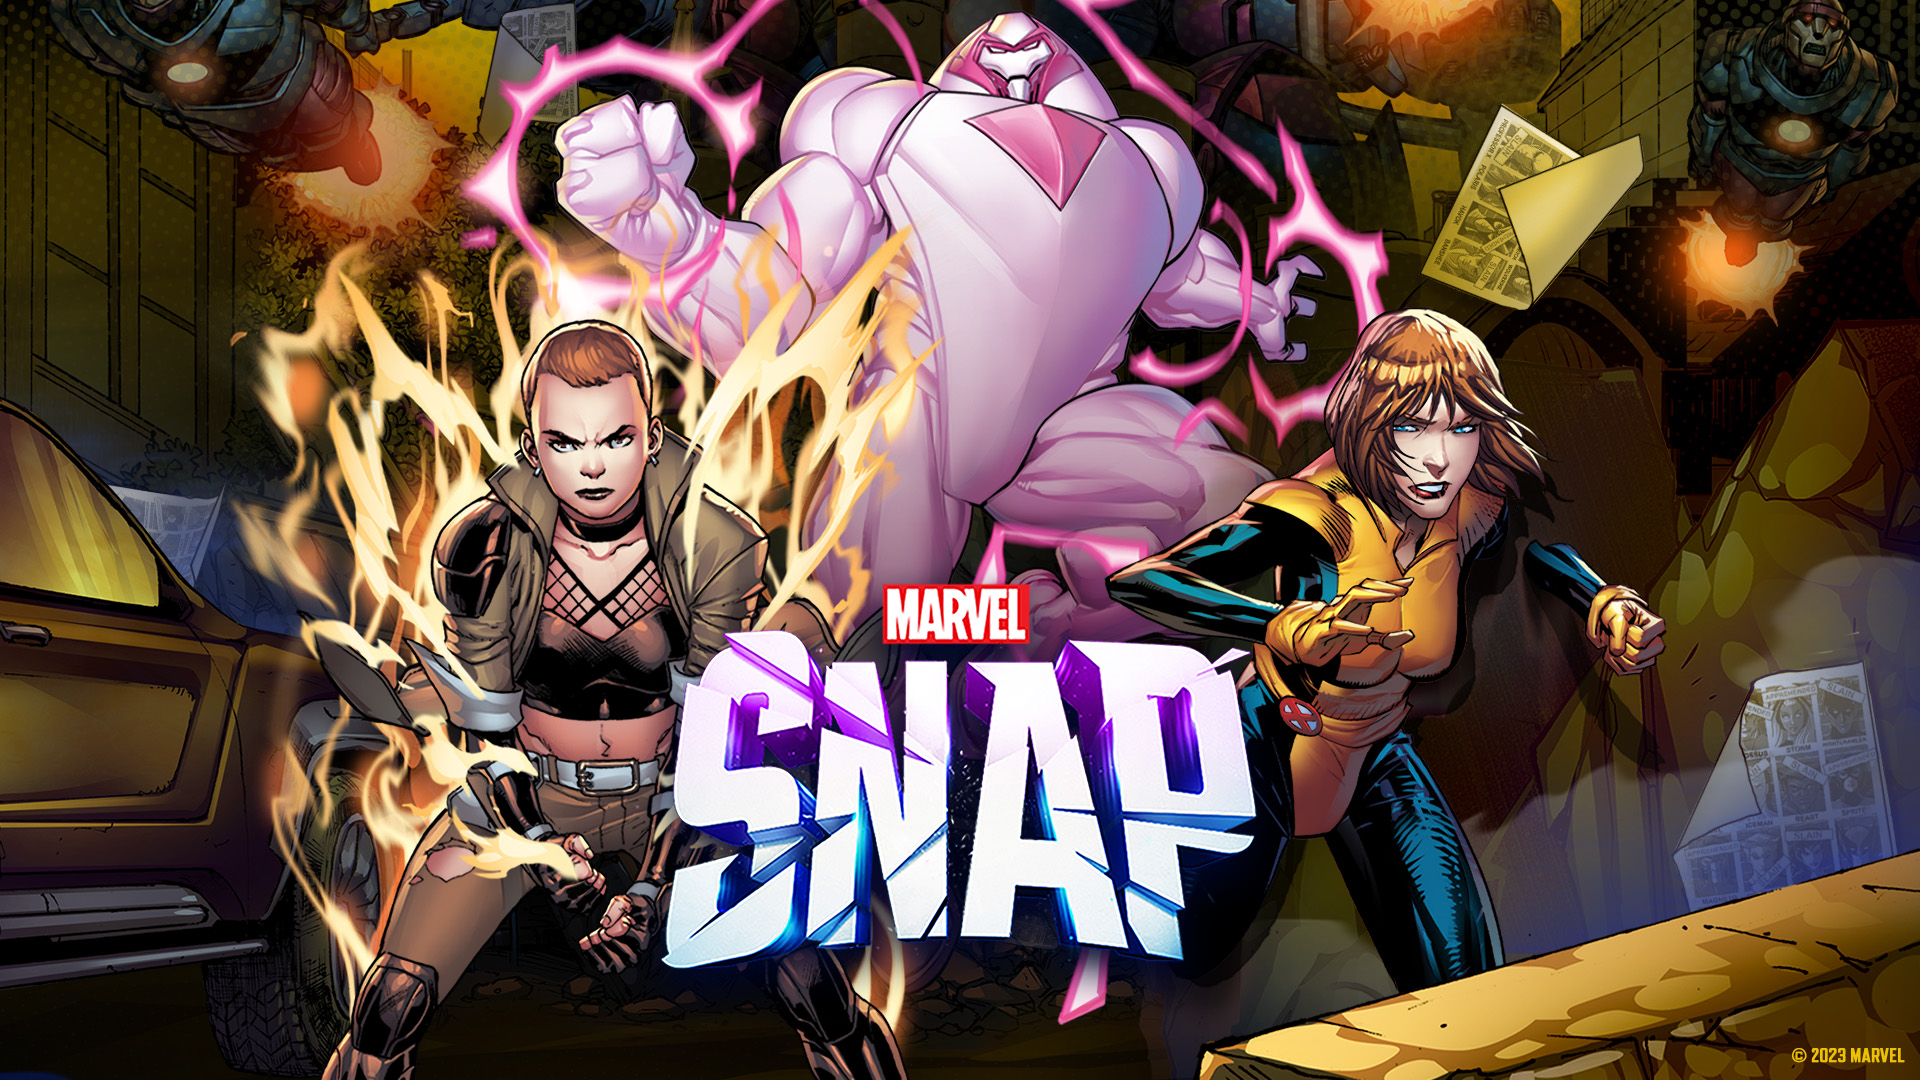 Celebrate Marvel Love Stories with MARVEL SNAP